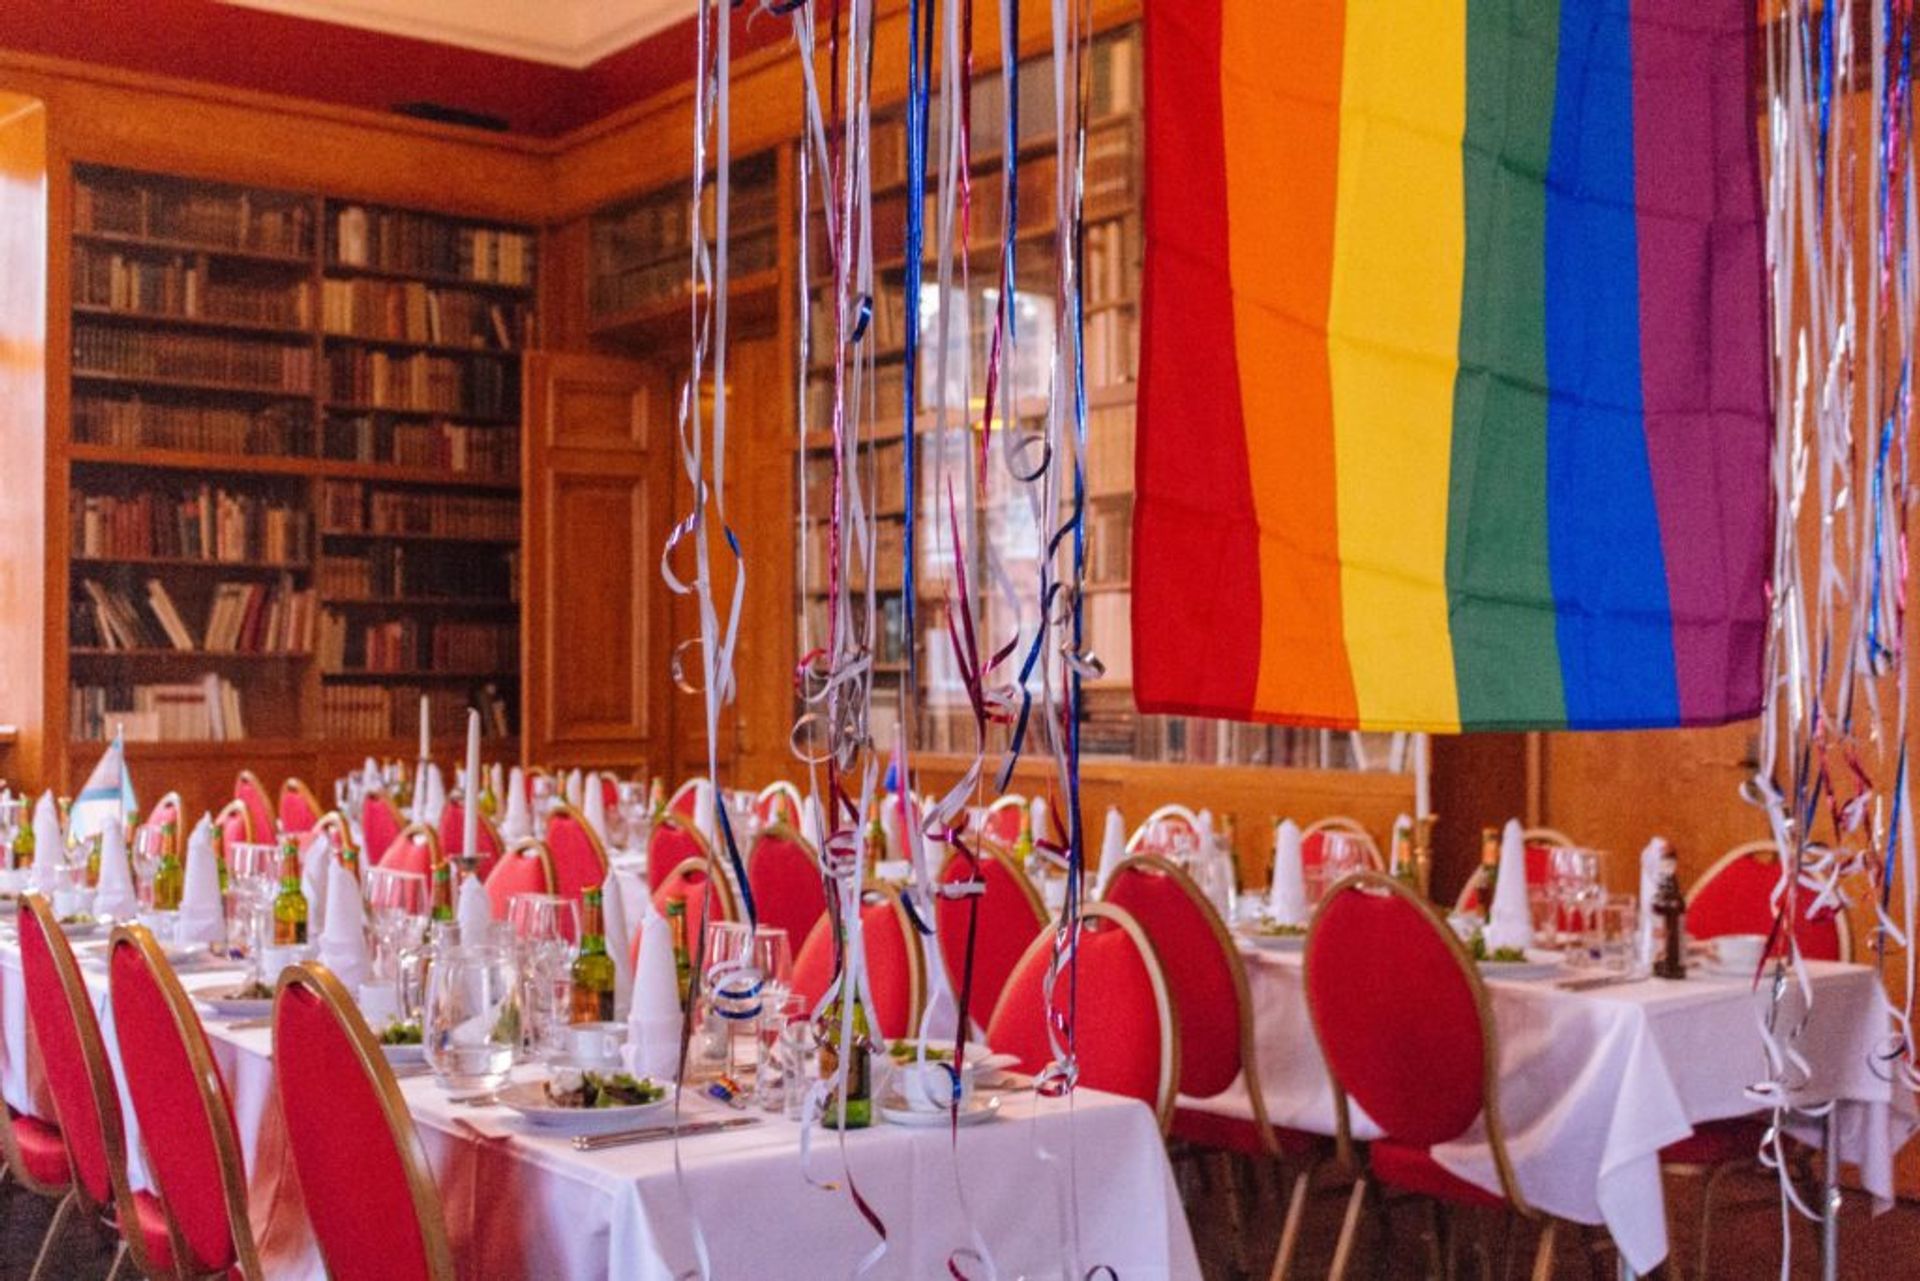 Pride flag and dinner decorations